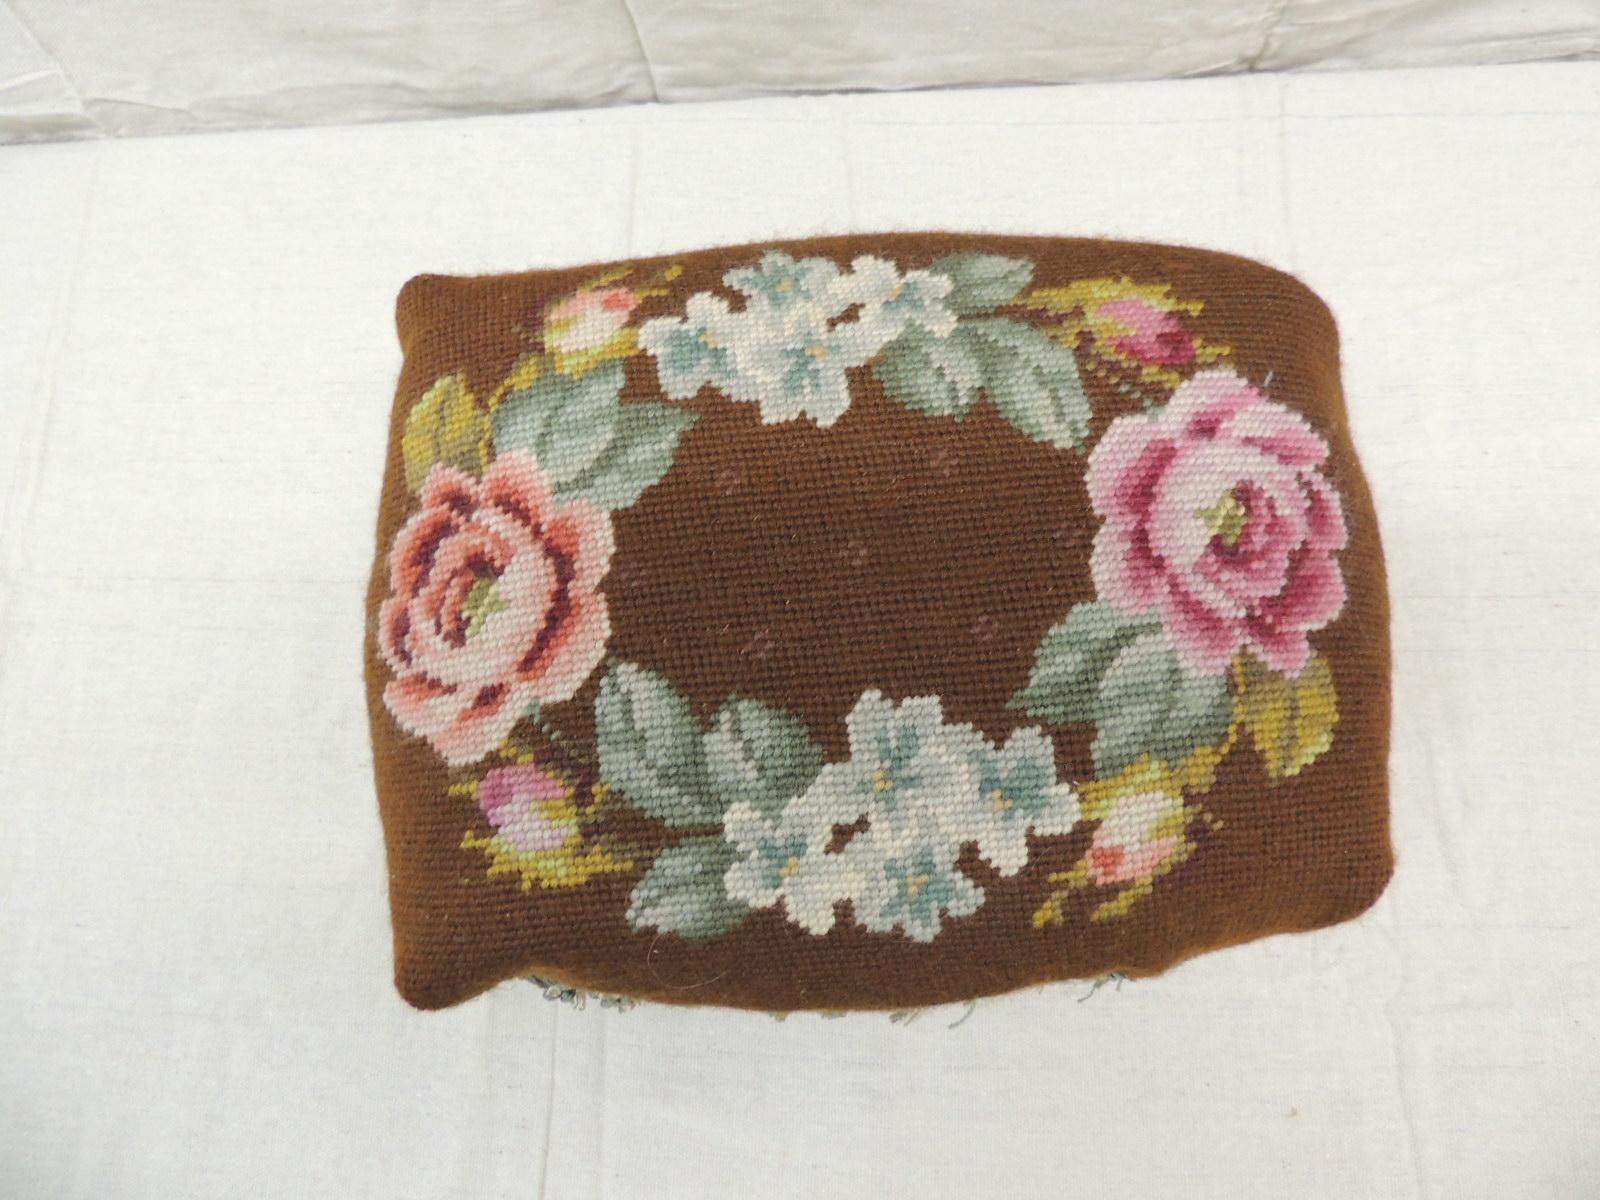 Antique tapestry footstool
Floral patterns in shade of pink, green, yellow and white with tassels and trim all around.
Small Queen Anne legs
Note: Sold as found
Size: 13